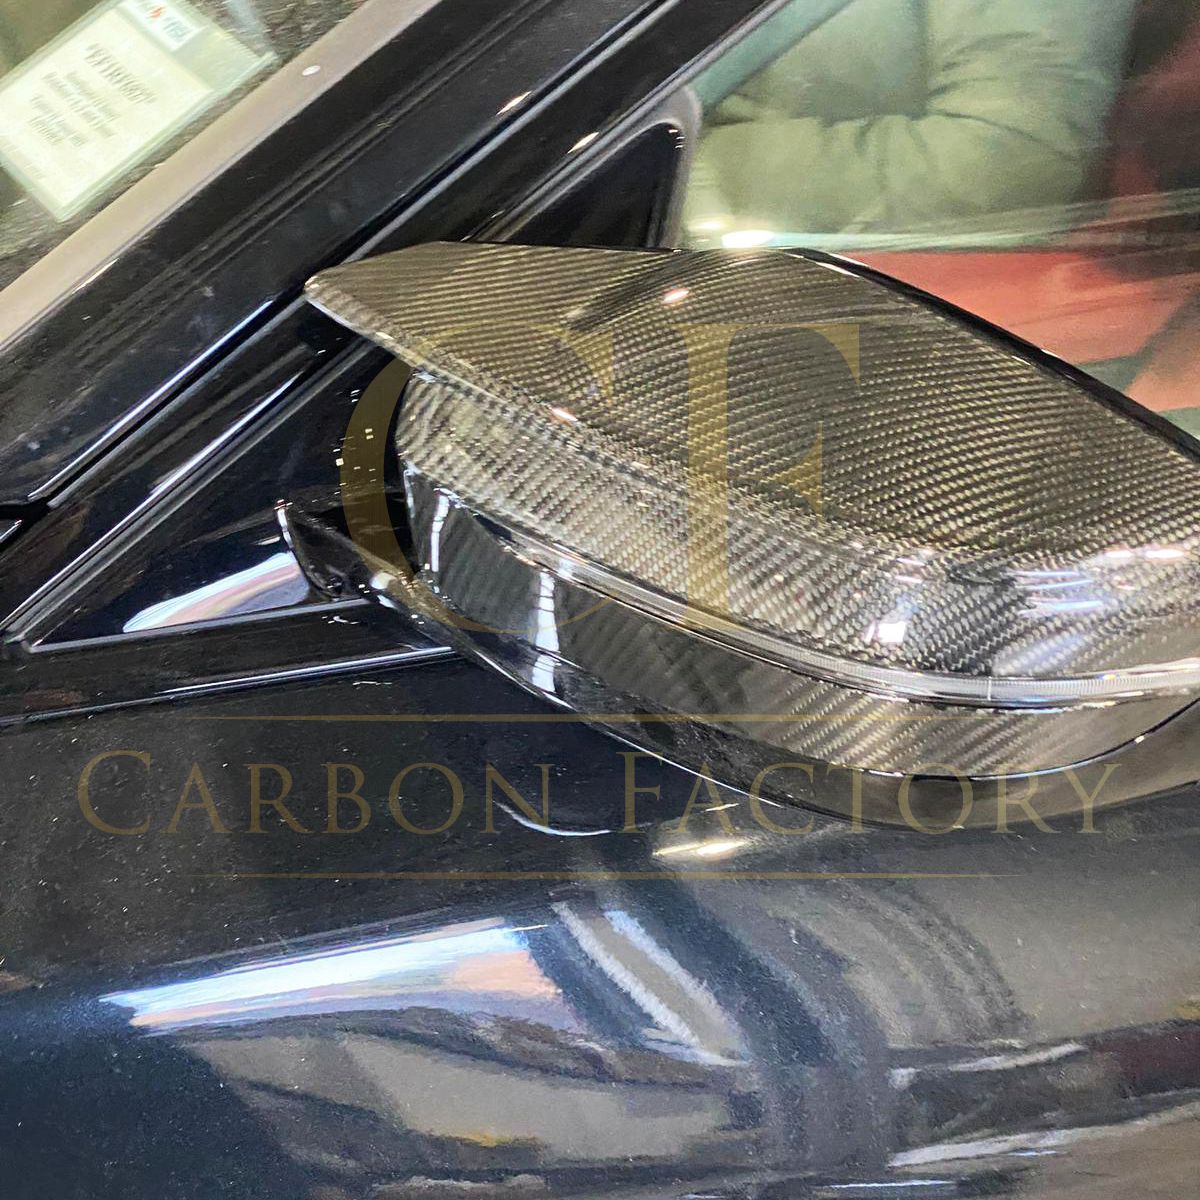 BMW G80 M3 G82 G83 M4 G42 M240i G20 M340i Pre-Preg Carbon Fibre Mirror covers 21-Present-Carbon Factory